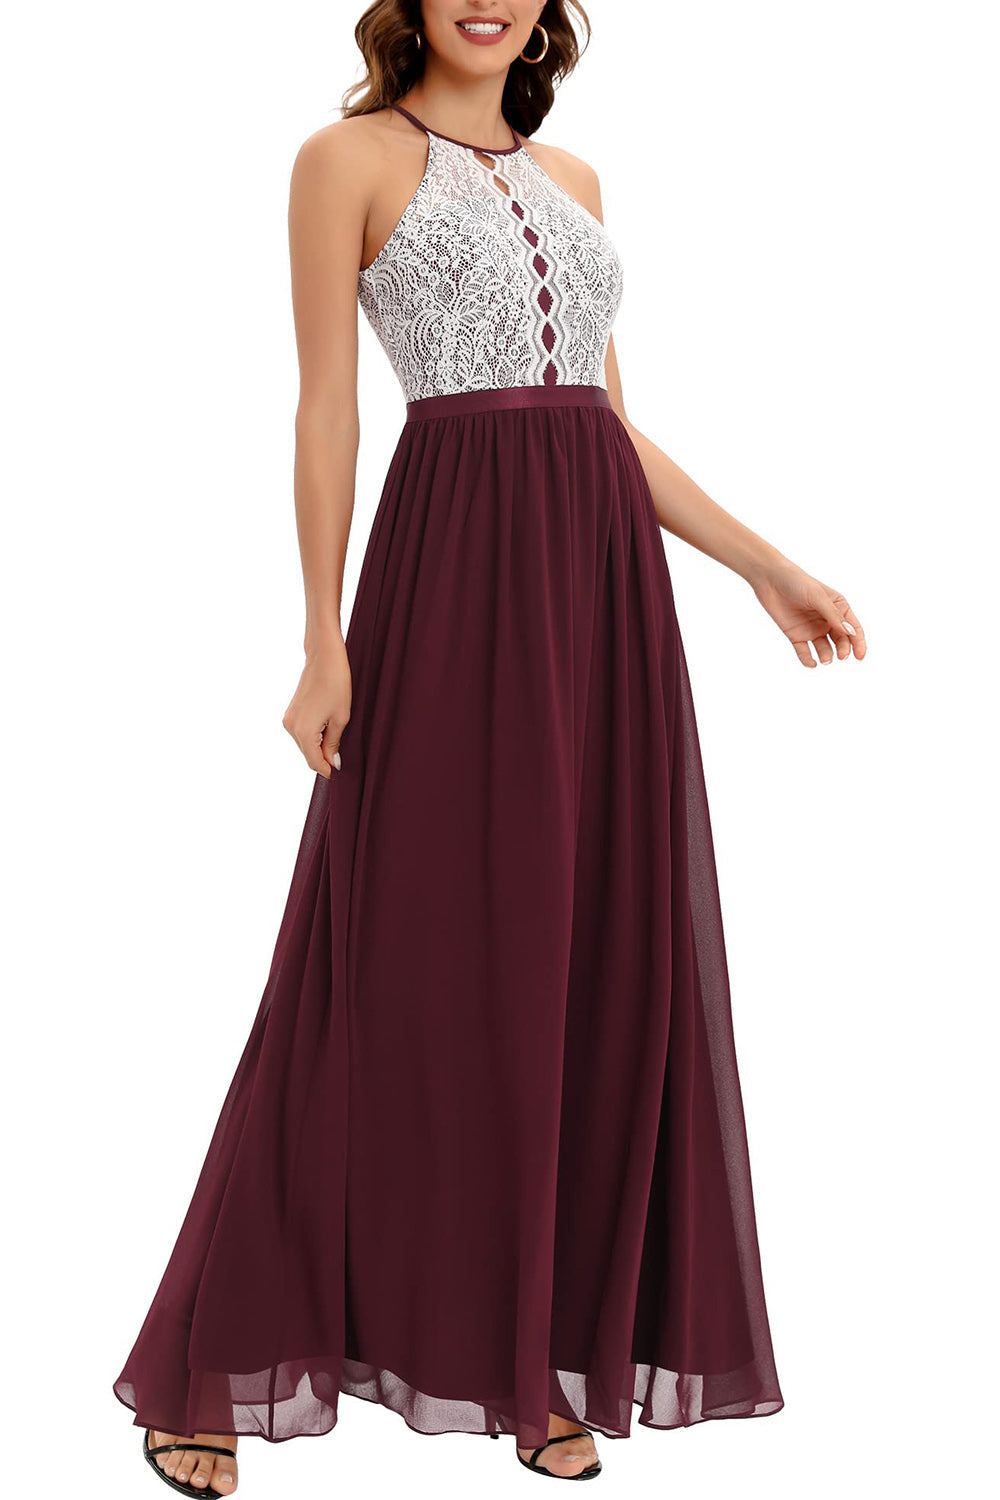 Burgundy A Line Halter Long Bridesmaid Dress with Lace